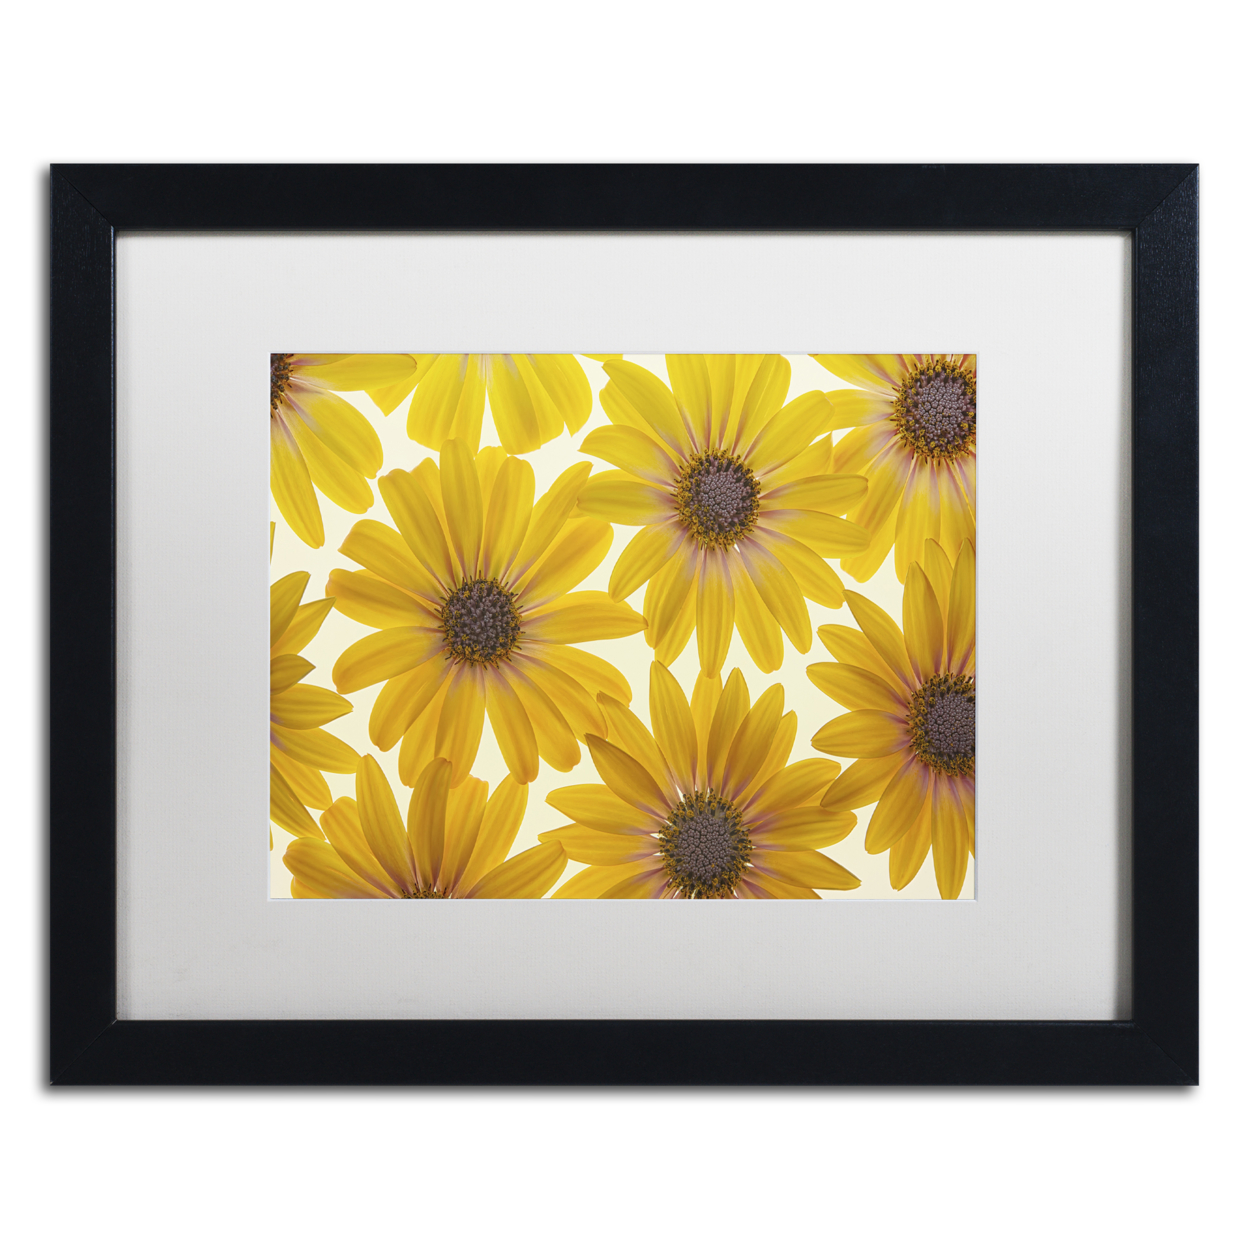 Cora Niele 'Yellow Cape Daisies' Black Wooden Framed Art 18 X 22 Inches